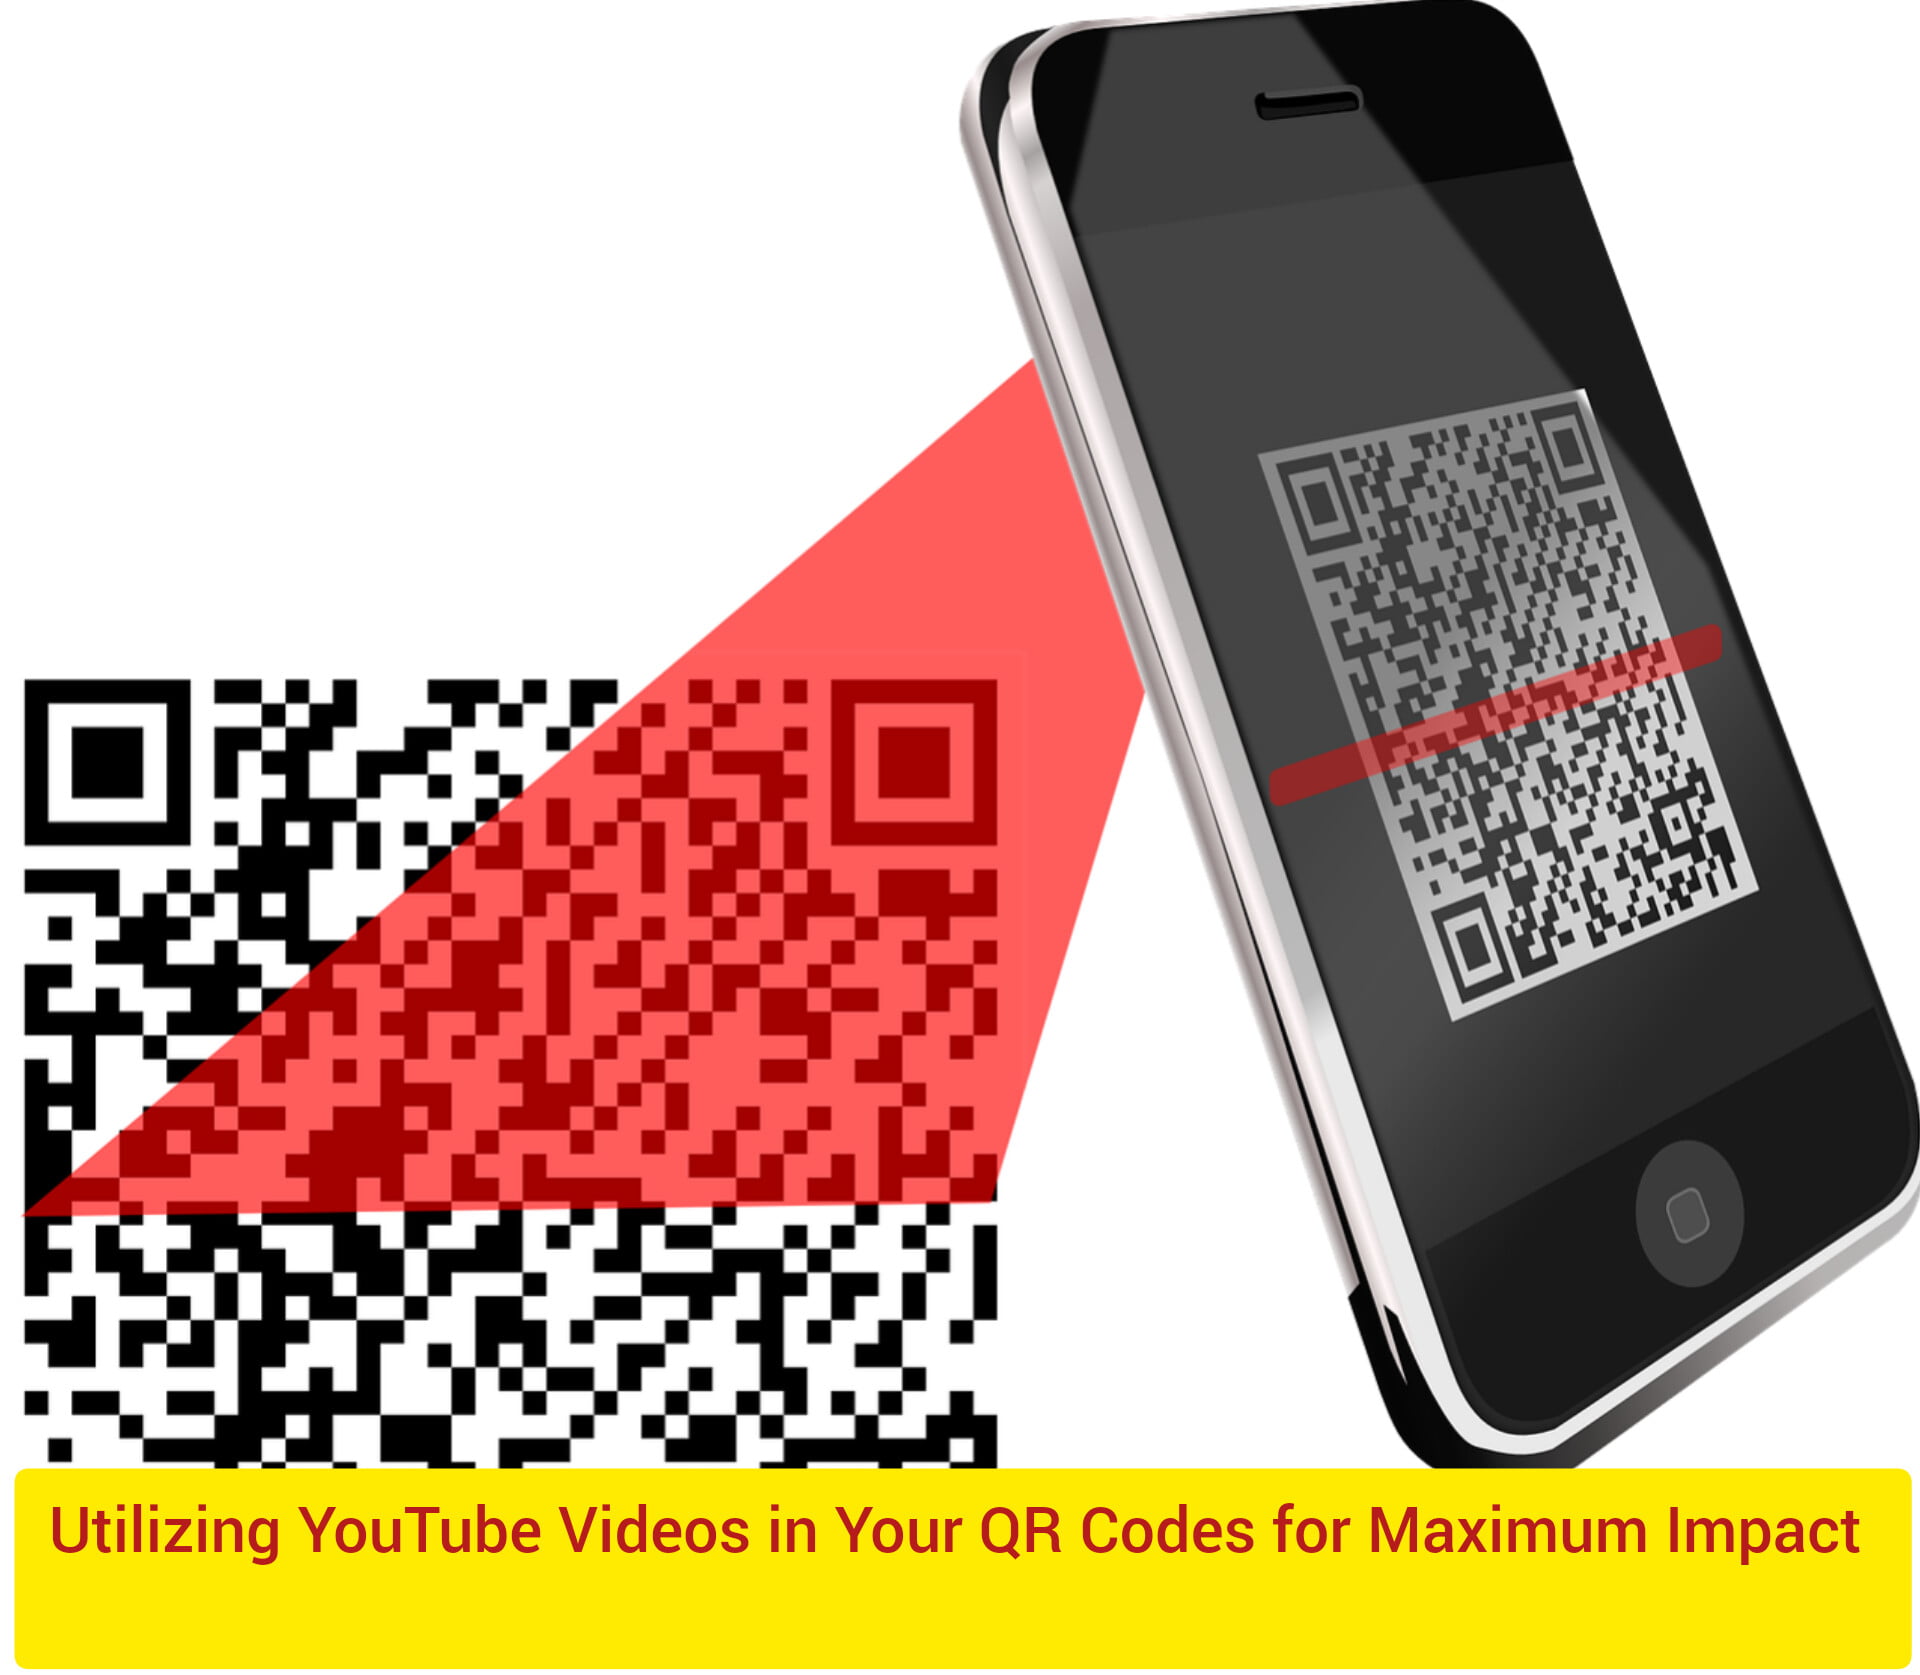 YouTube Videos in Your QR Codes